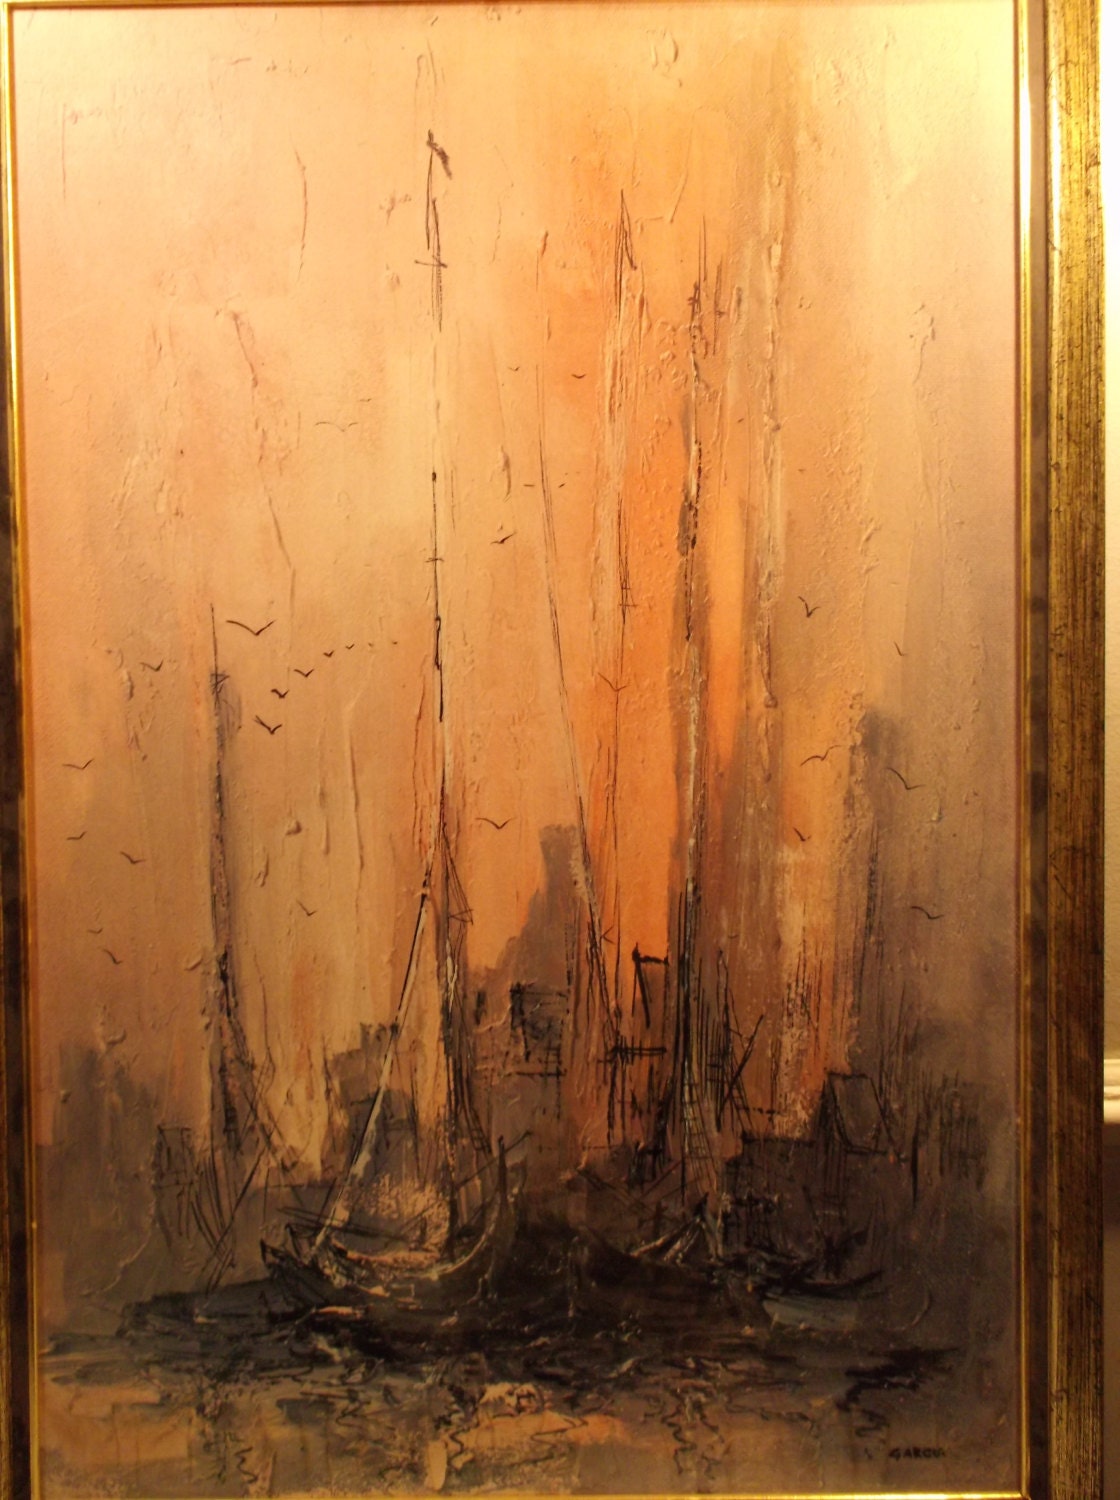 Danny Garcia Oil Painting Tall Masts. Framed reproduction or